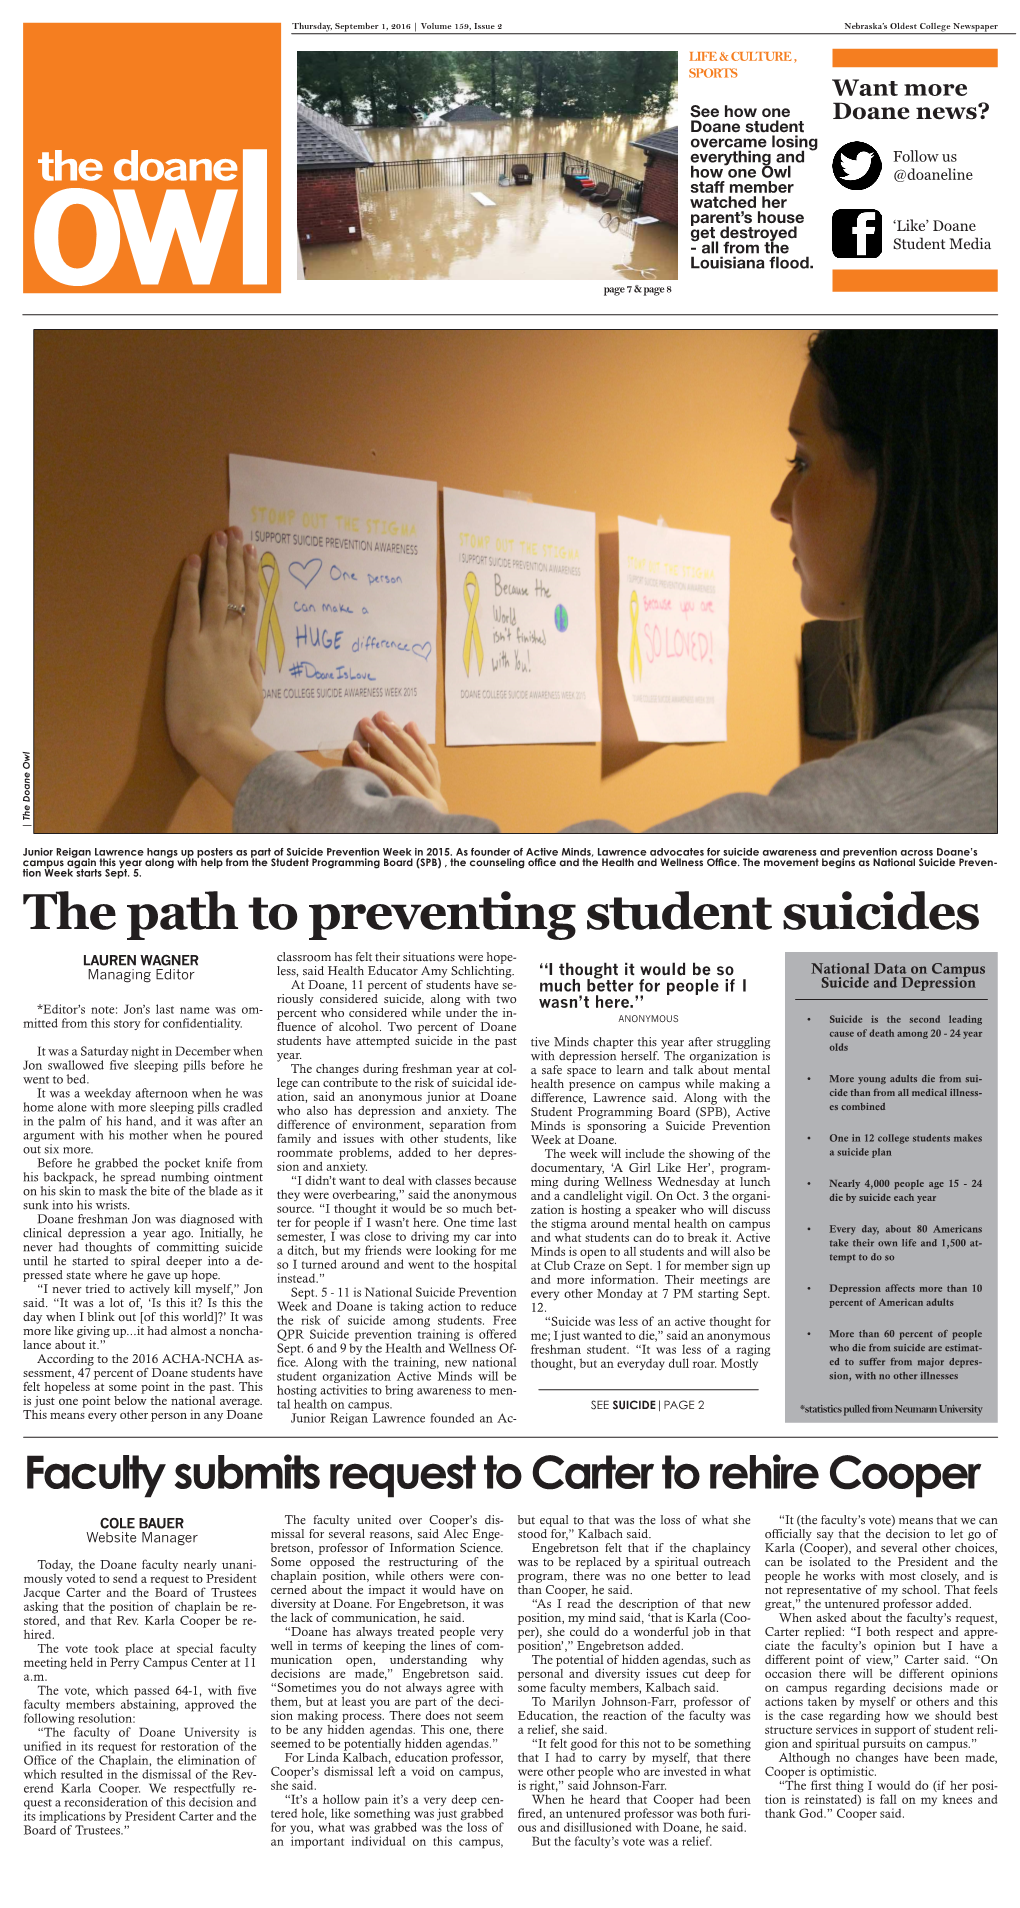 The Path to Preventing Student Suicides